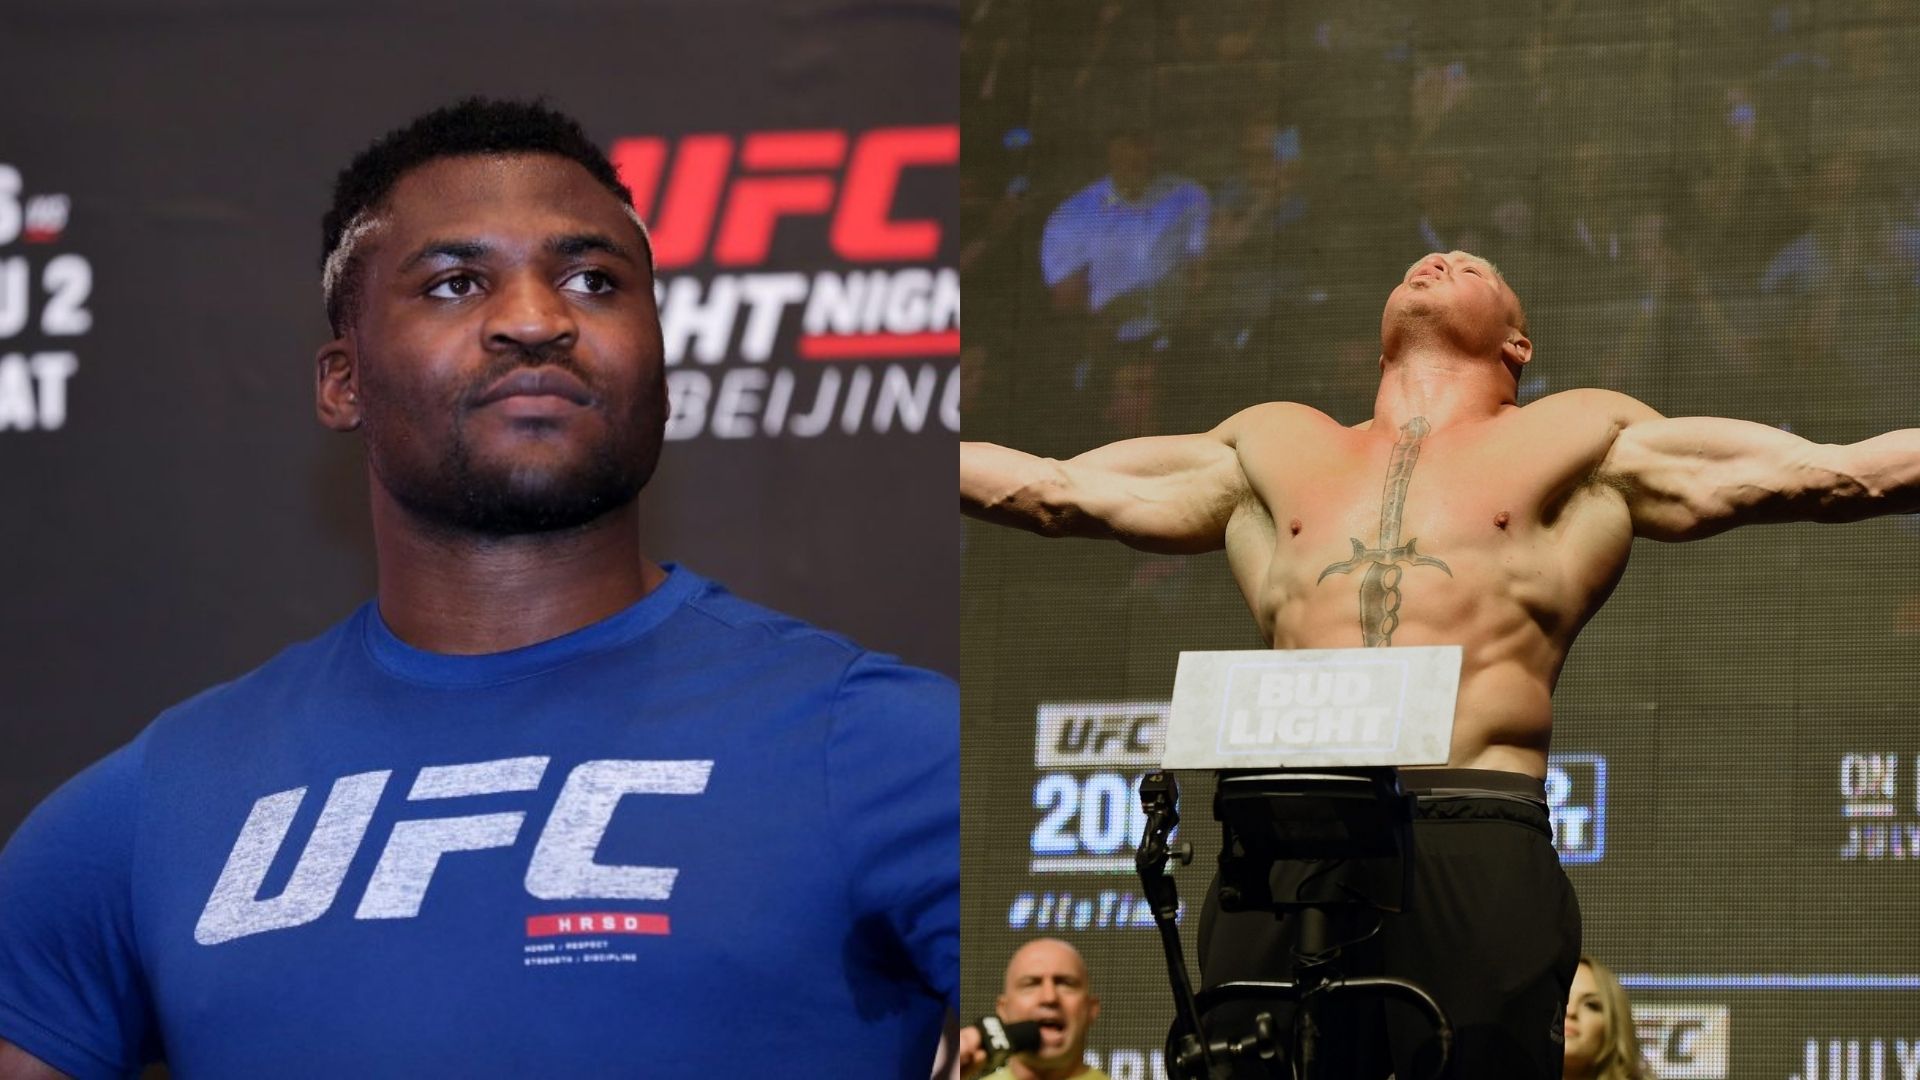 Brock Lesnar and Francis Ngannou have fought in the UFC Heavyweight division